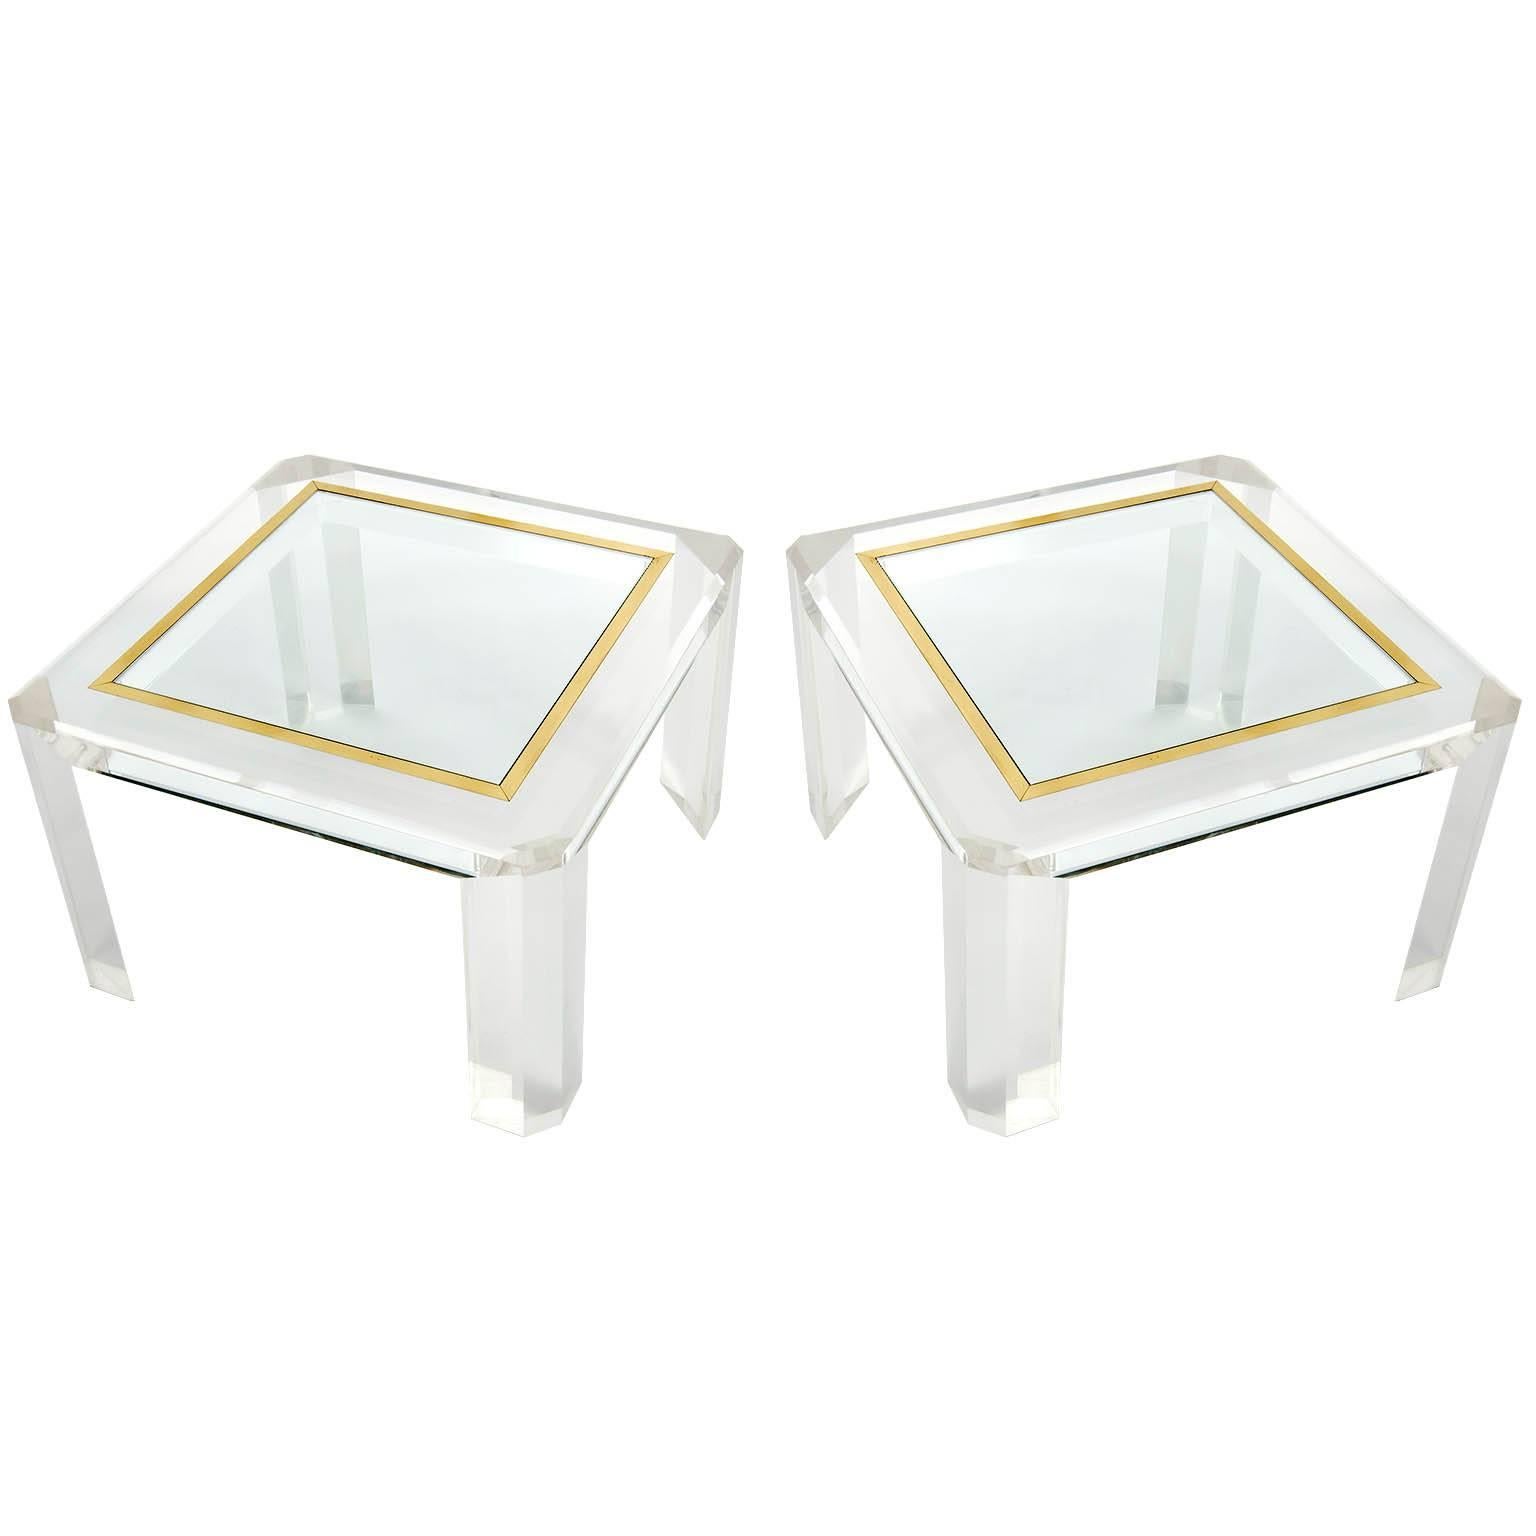 Pair of Lucite Coffee Cocktail Tables, Brass Glass, 1970s